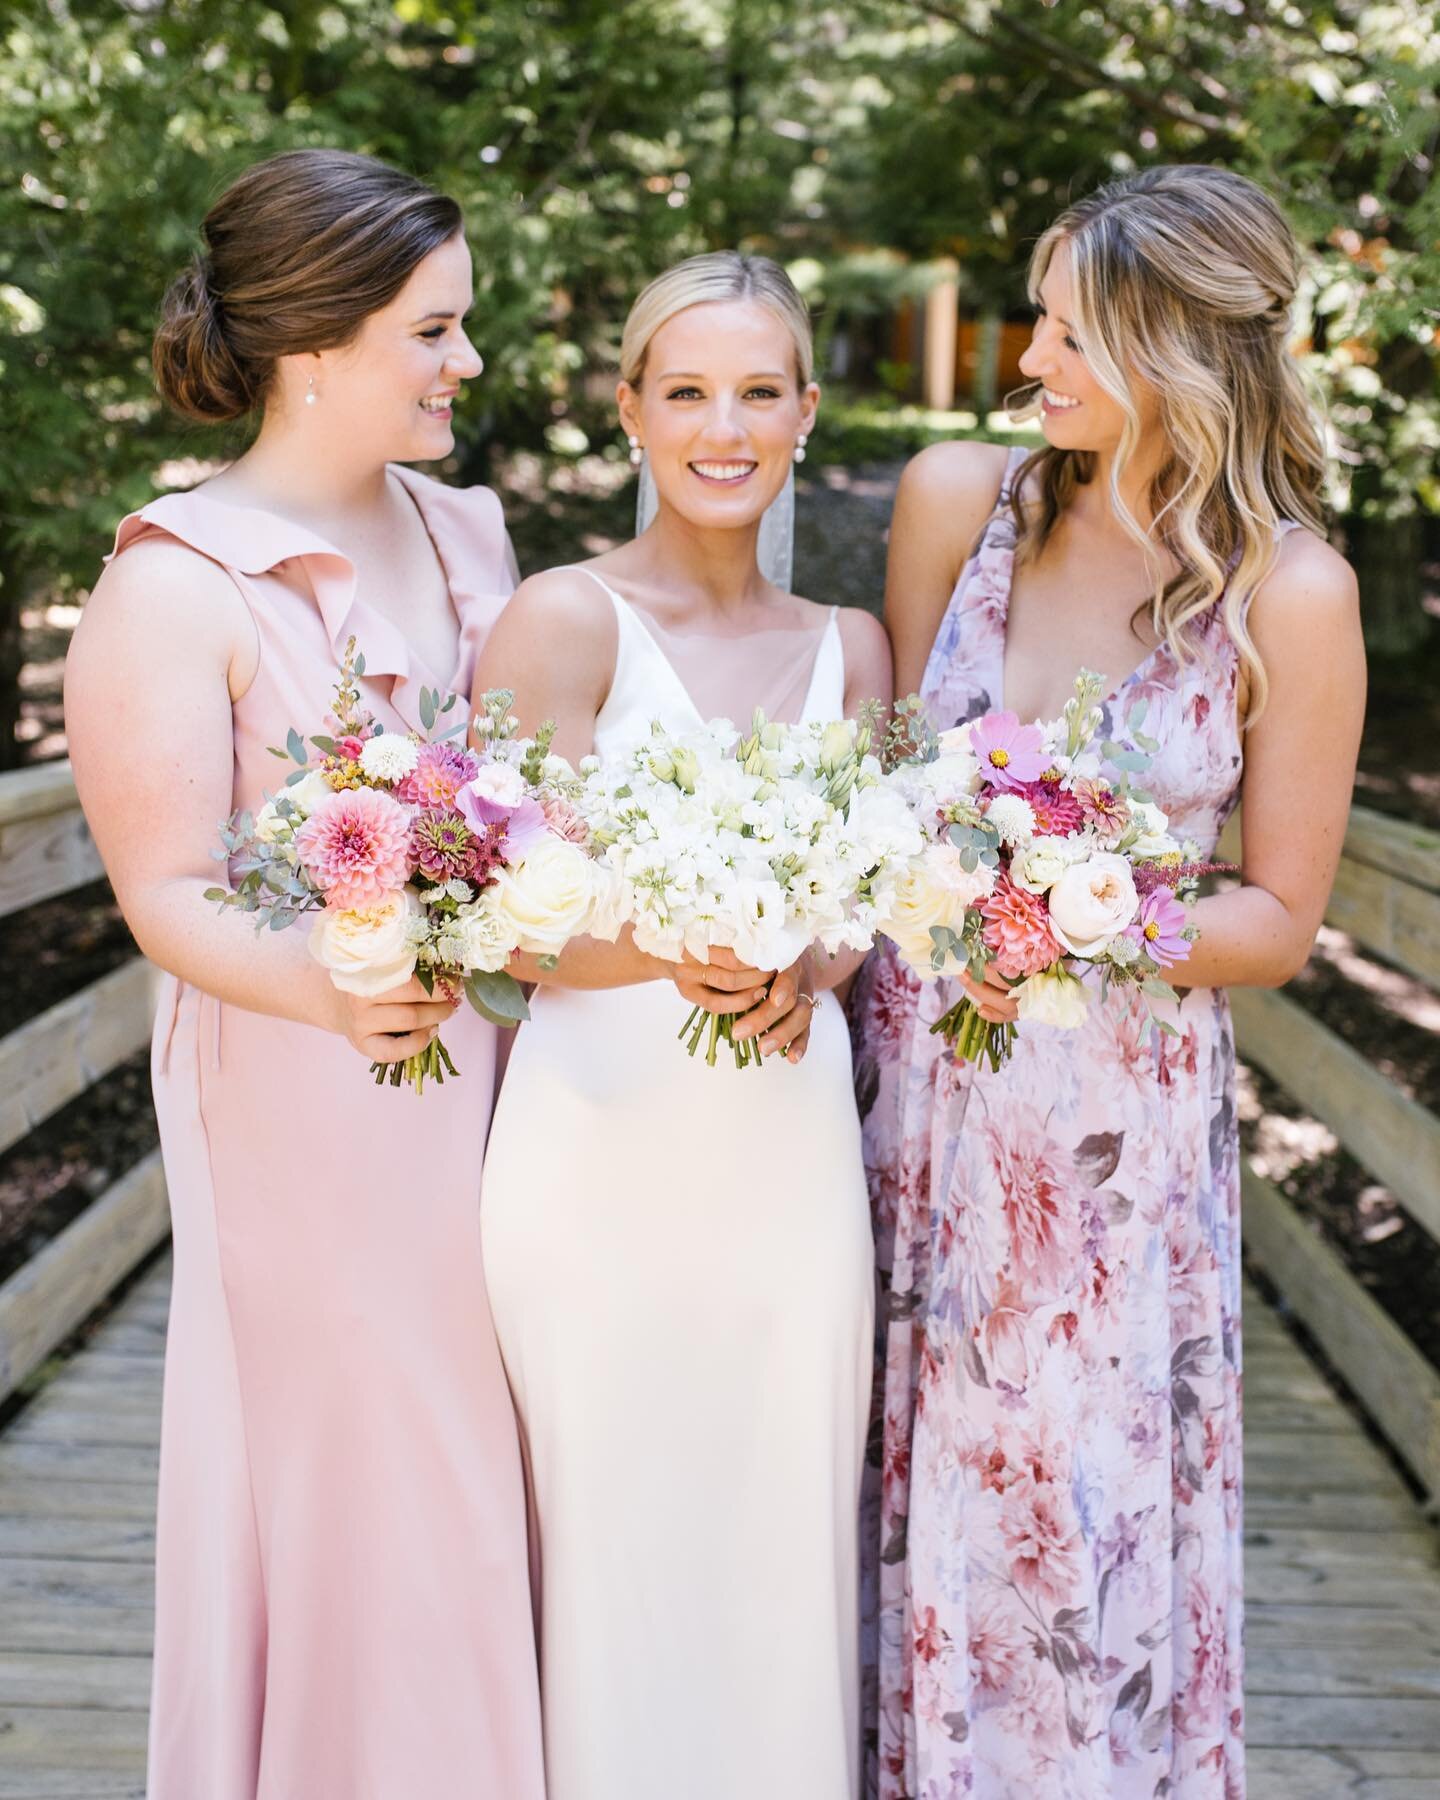 Blushing beauties &amp; picturesque ceremony scenes along the shores of Lake Michigan&hellip; we are so ready for summer in beautiful Northern Michigan!

Photography | @feitenphotography 
Venue | @leelanauschoolevents 
Floral Design | @sweetwaterflor